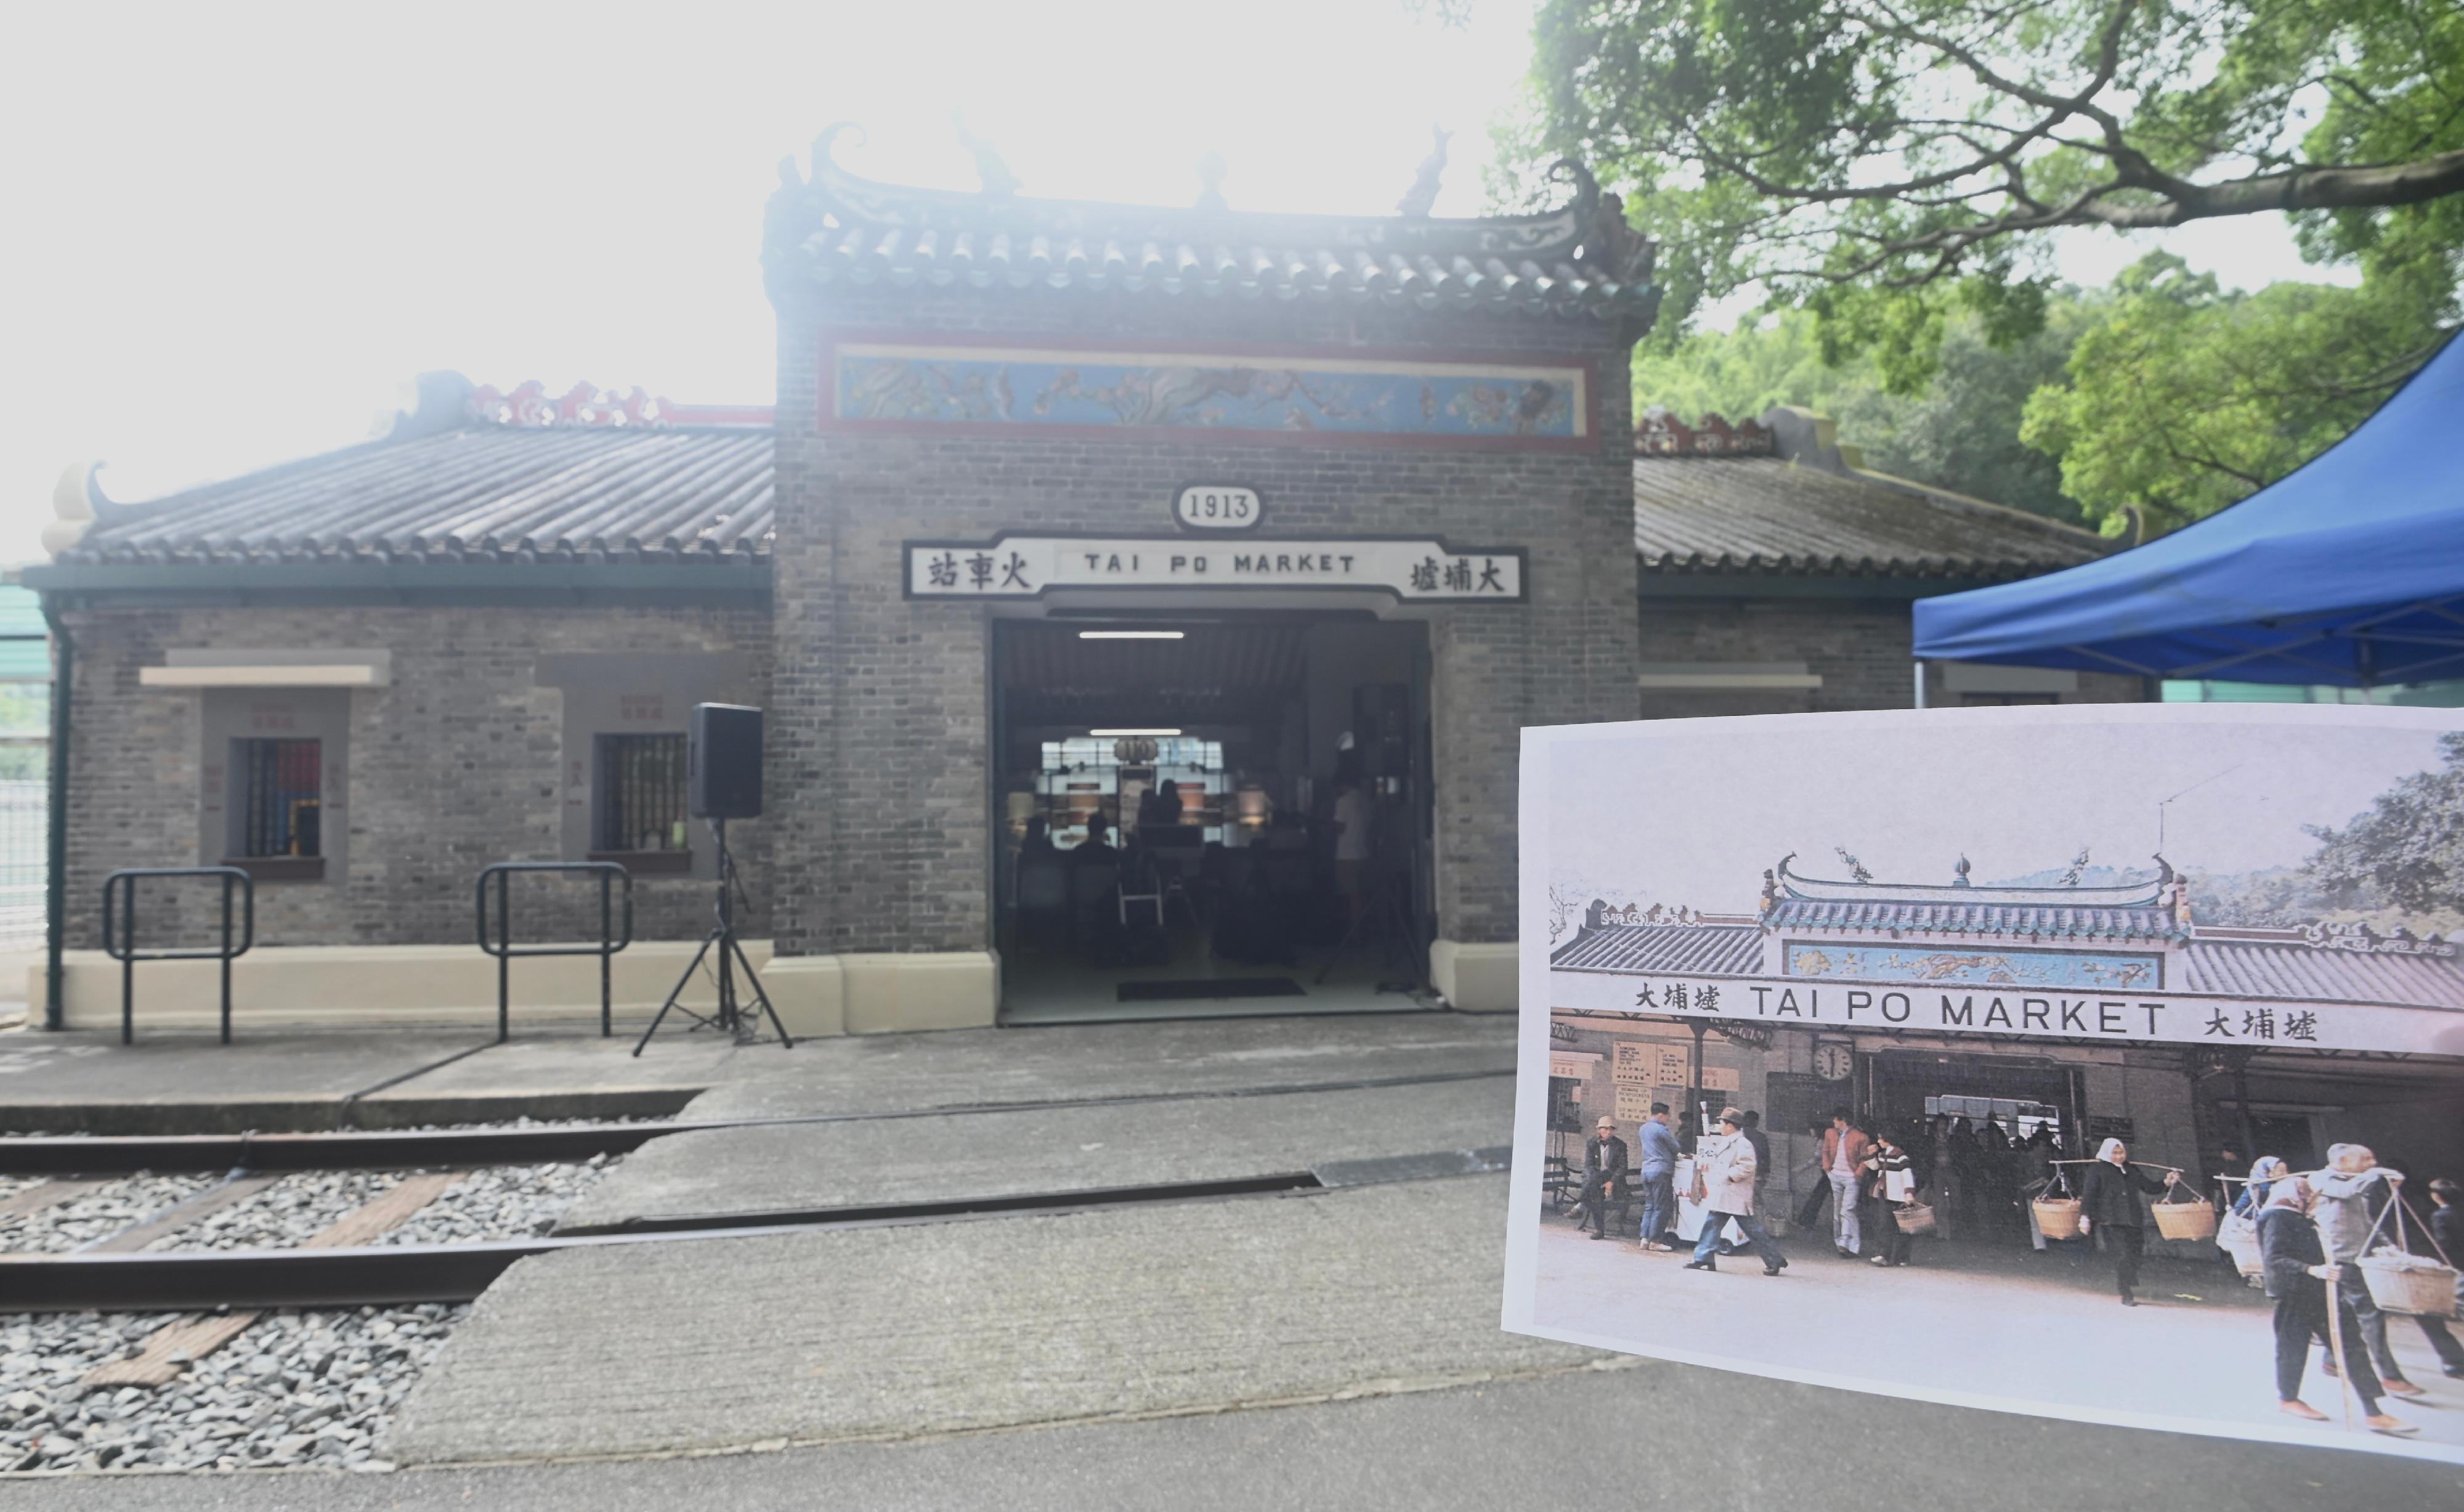 The "Stories Behind Built Heritage: Old Tai Po Market Railway Station Celebrates 110 Years" exhibition is now on display at the Hong Kong Railway Museum. Photo shows past and present features of the Old Tai Po Market Railway Station.